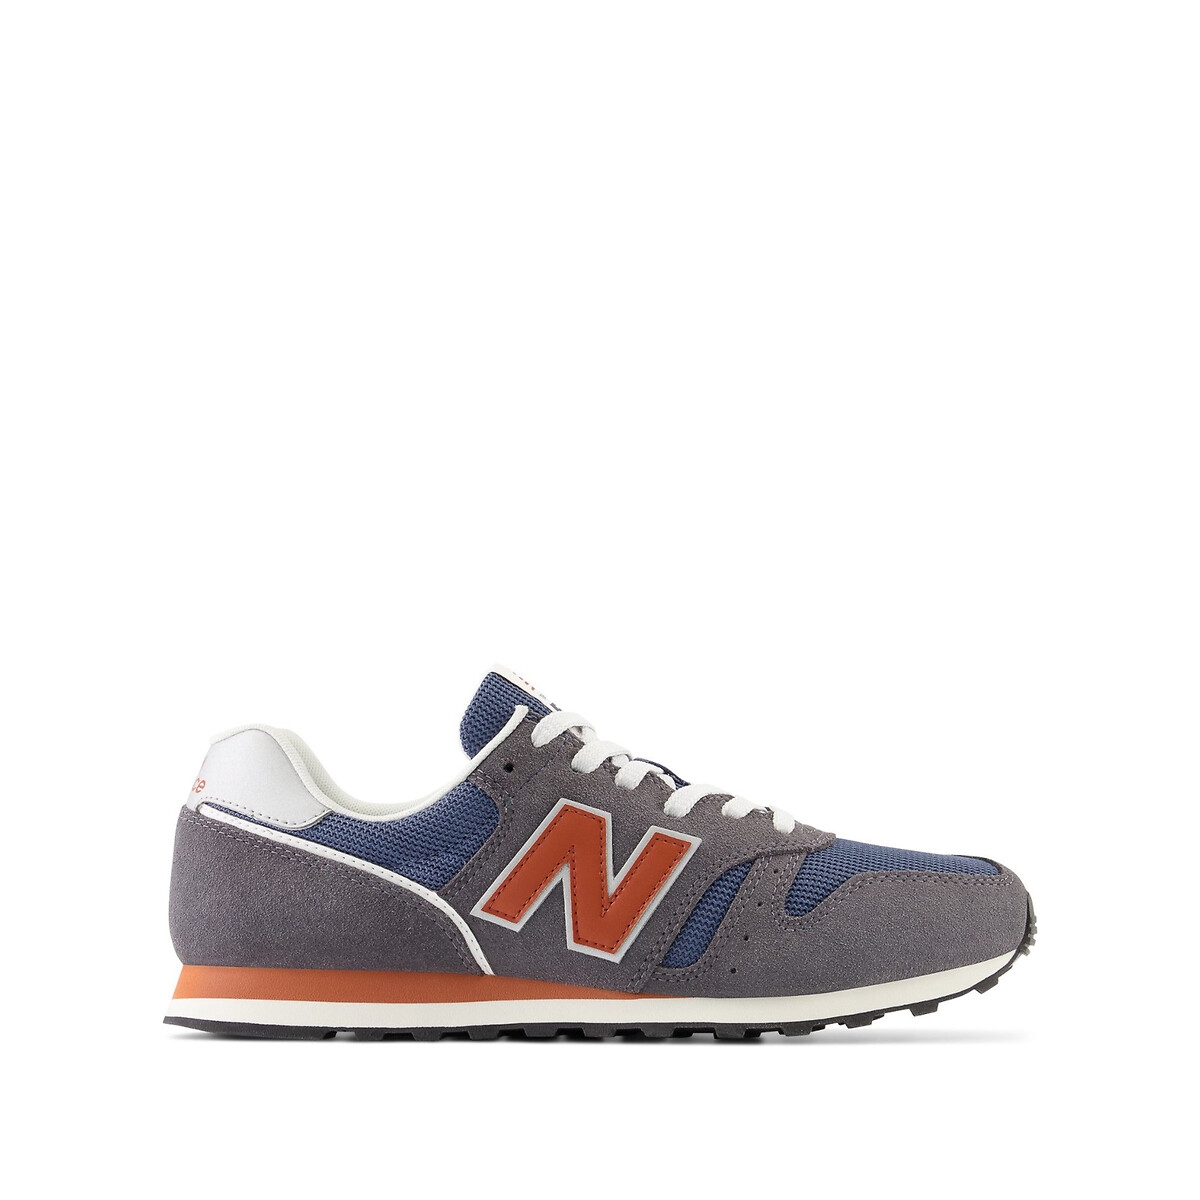 New Balance ML373 Leather Trainers | Rather Saucy